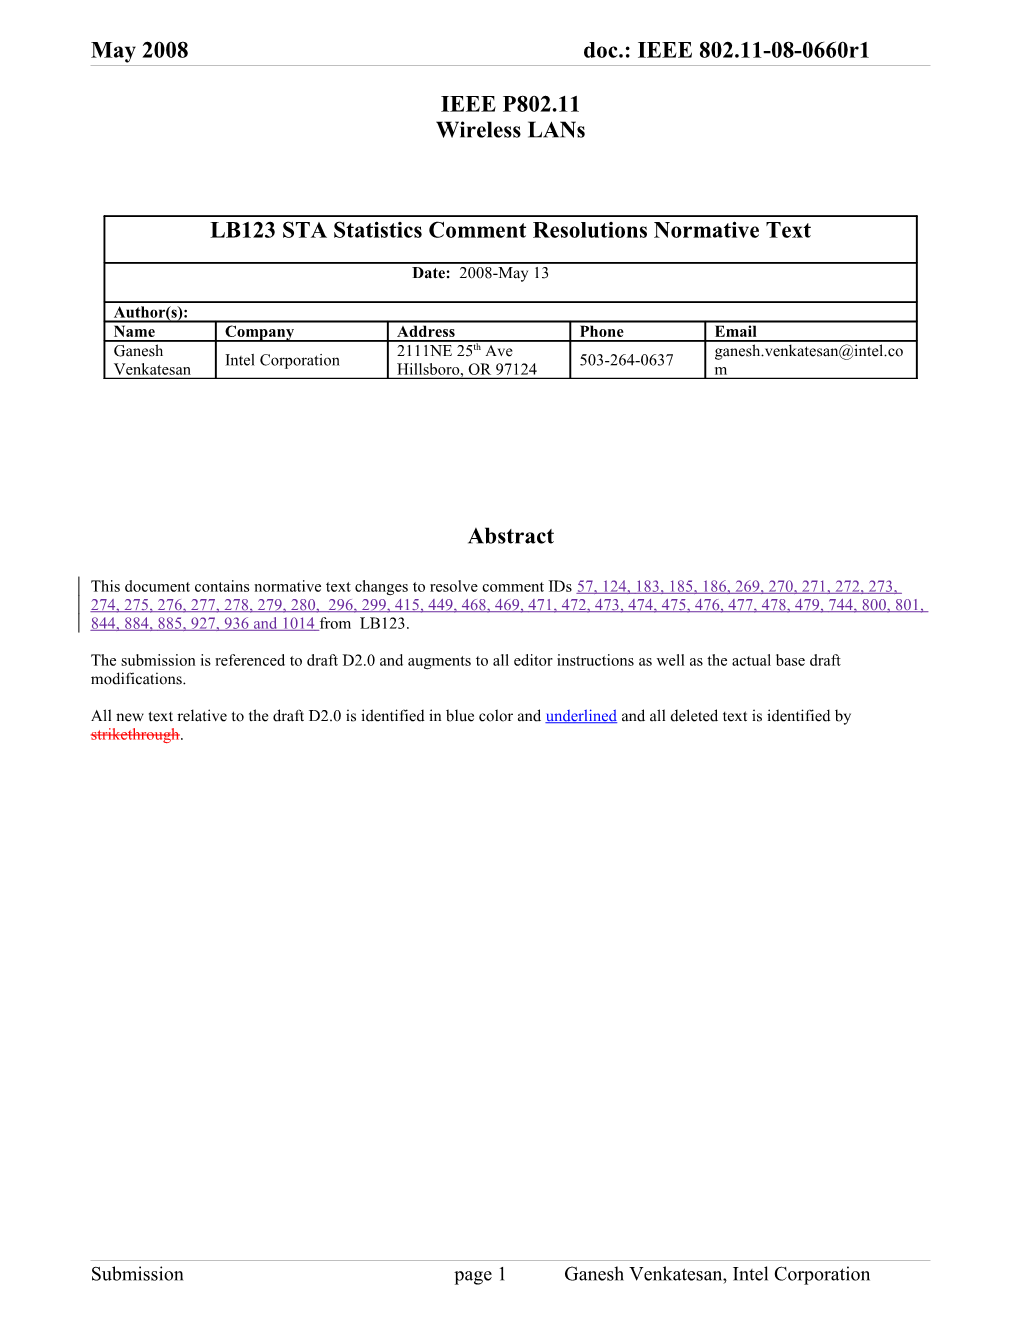 This Document Contains Normative Text Changes to Resolve Comment Ids57, 124, 183, 185